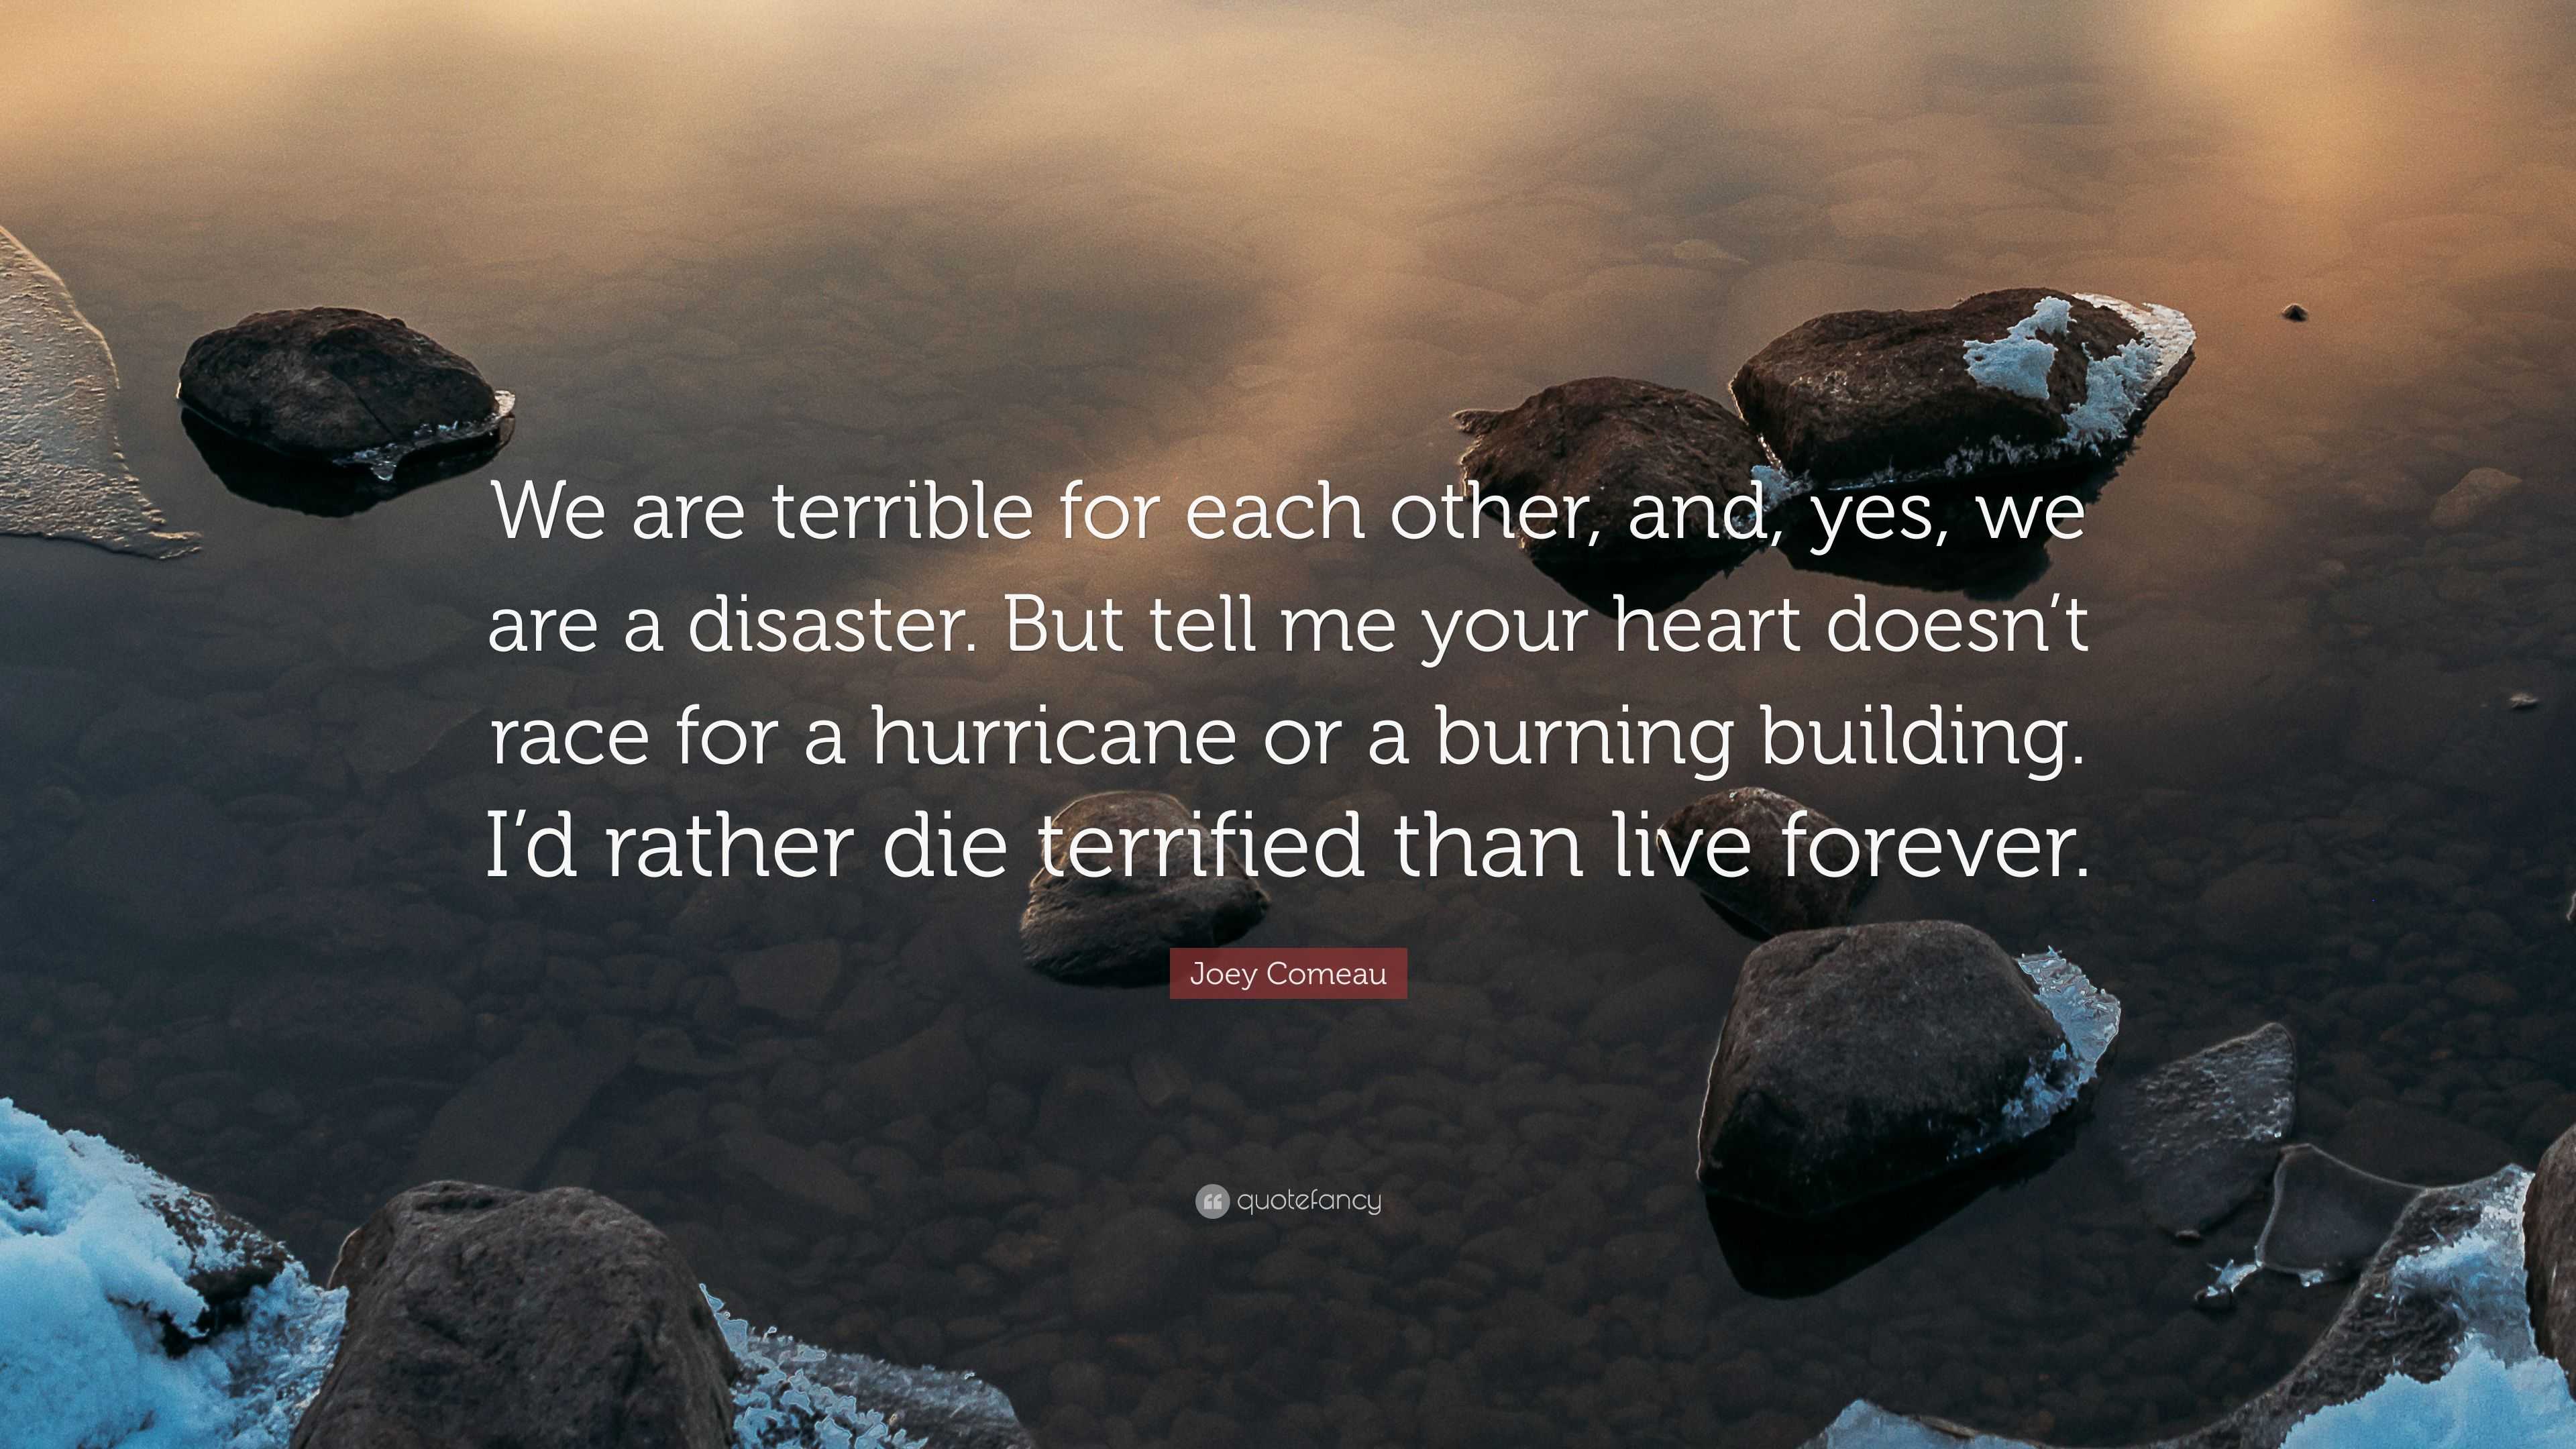 https://quotefancy.com/media/wallpaper/3840x2160/4874076-Joey-Comeau-Quote-We-are-terrible-for-each-other-and-yes-we-are-a.jpg